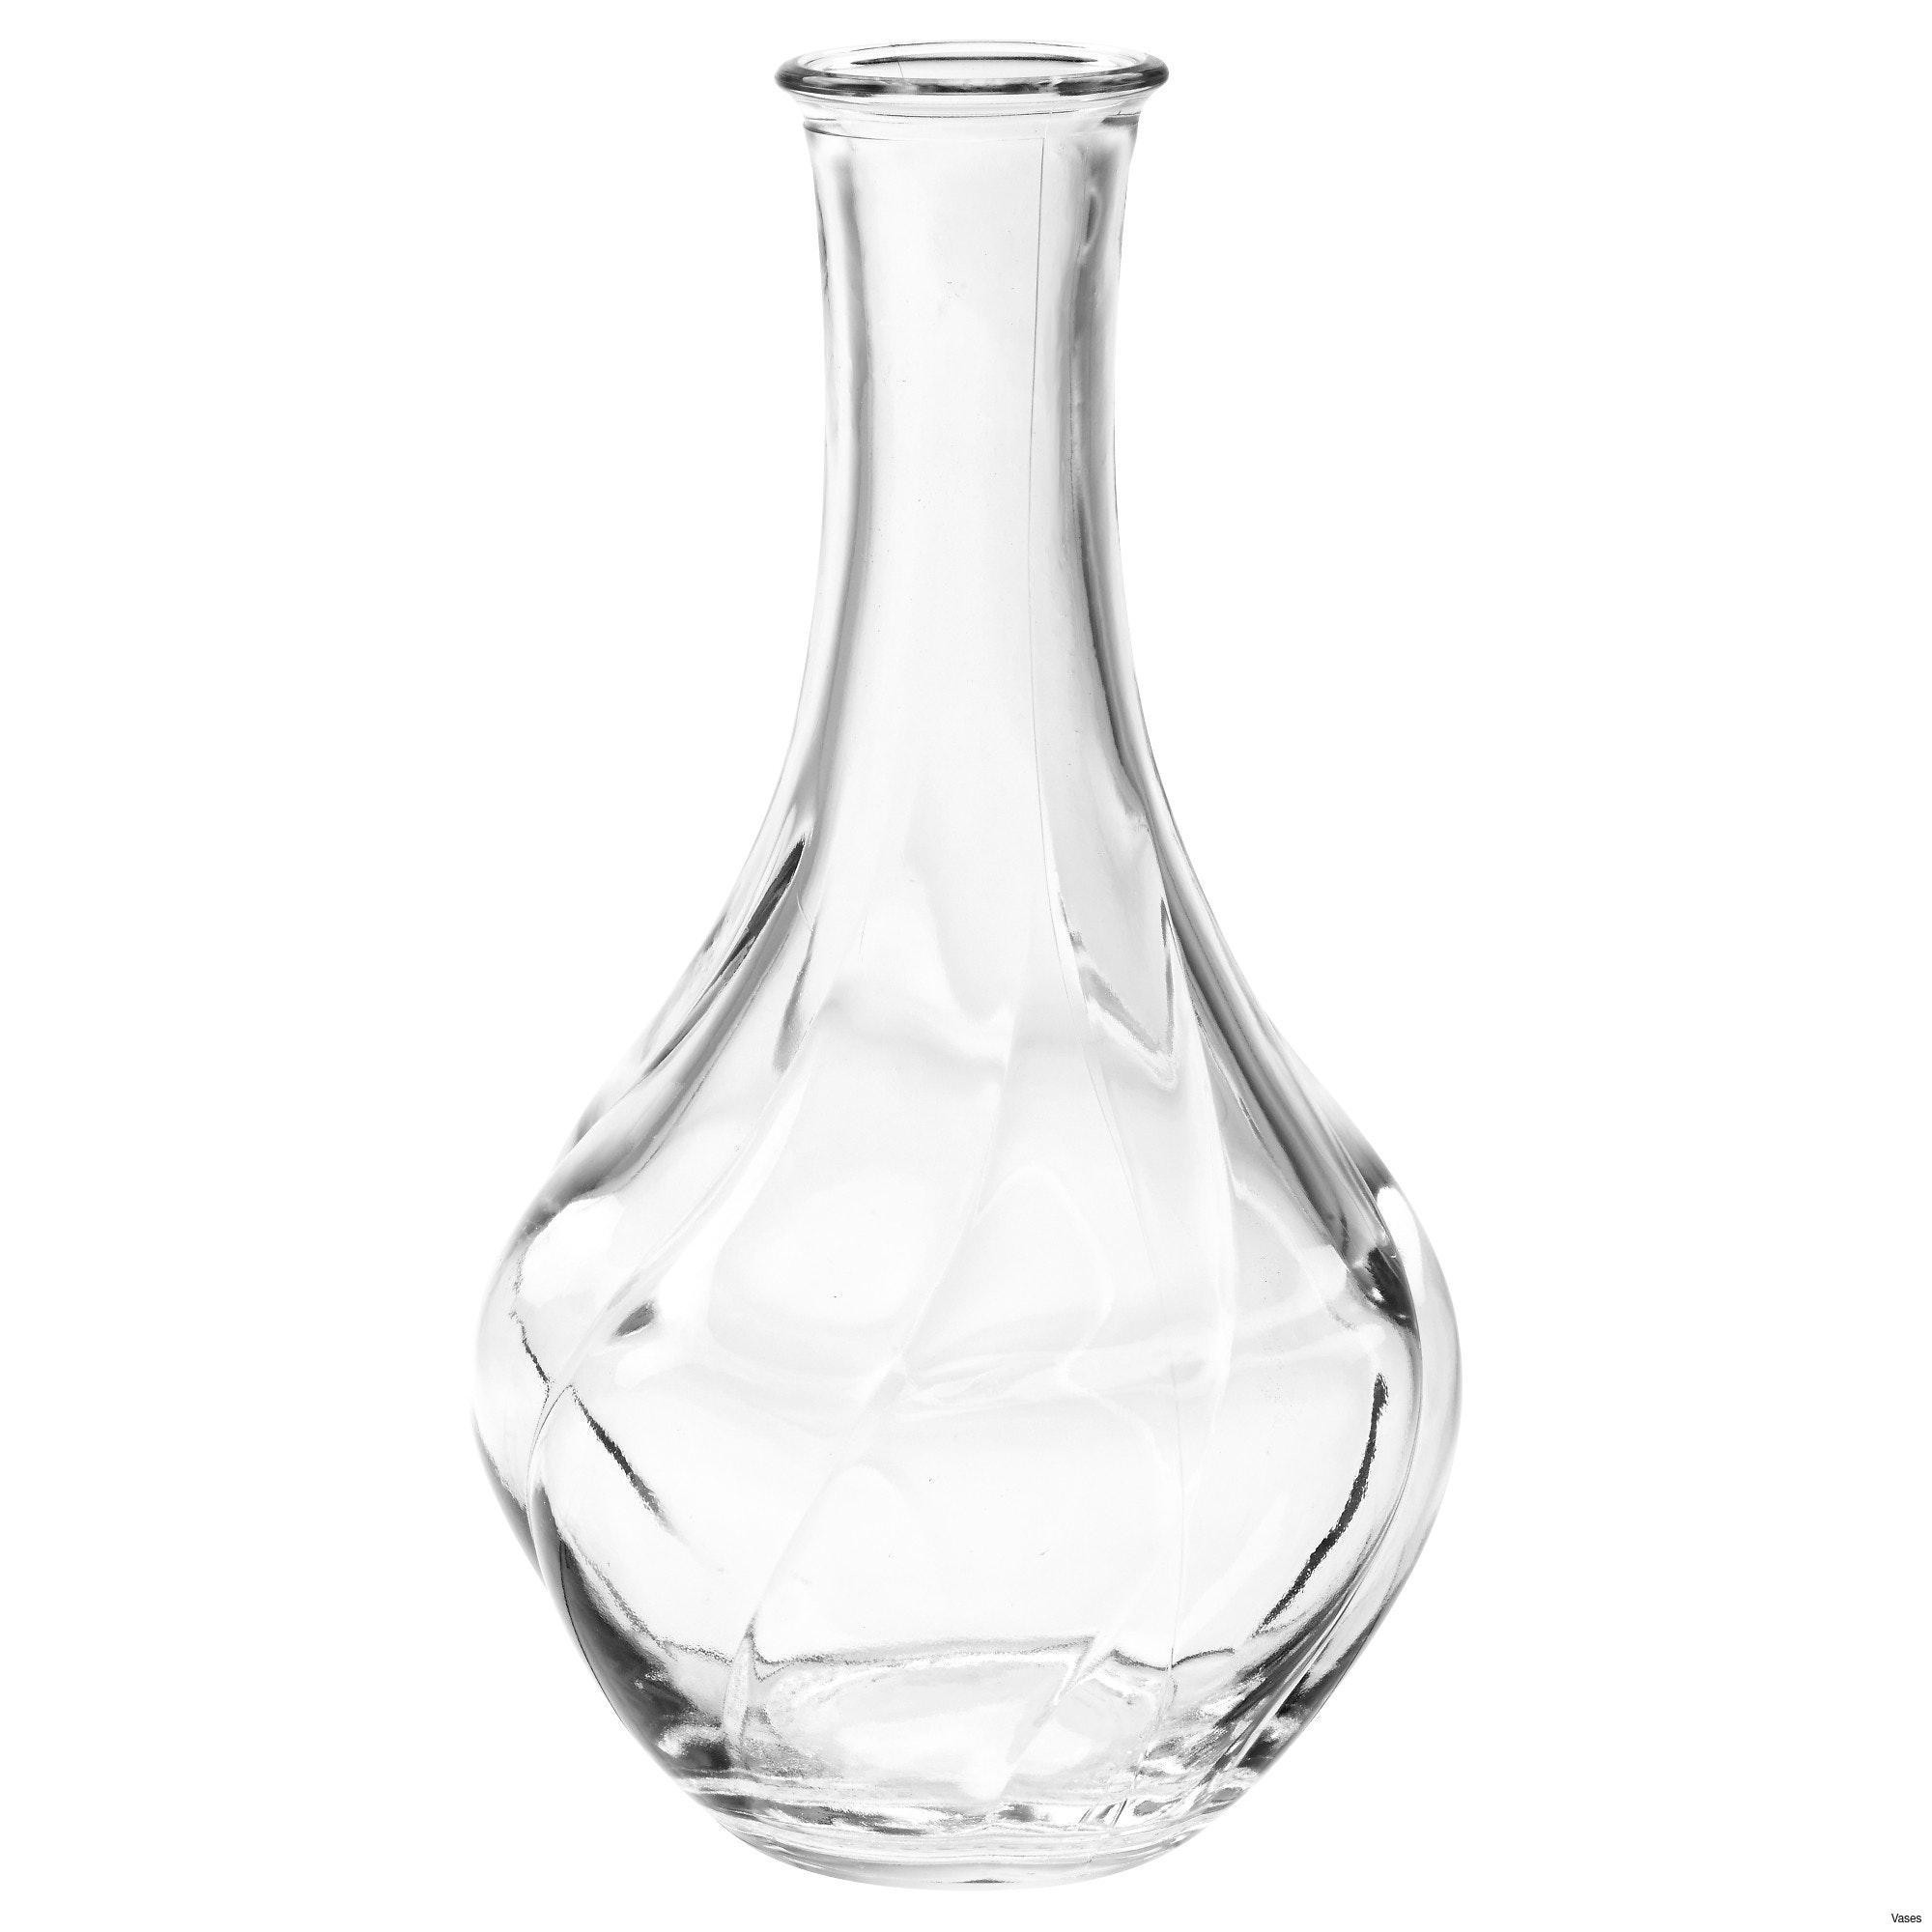 15 Stunning Fluted Glass Vase 2024 free download fluted glass vase of heavy glass vase images l h vases 12 inch hurricane clear glass vase for heavy glass vase gallery living room glass vases fresh clear vase 0d tags amazing and of